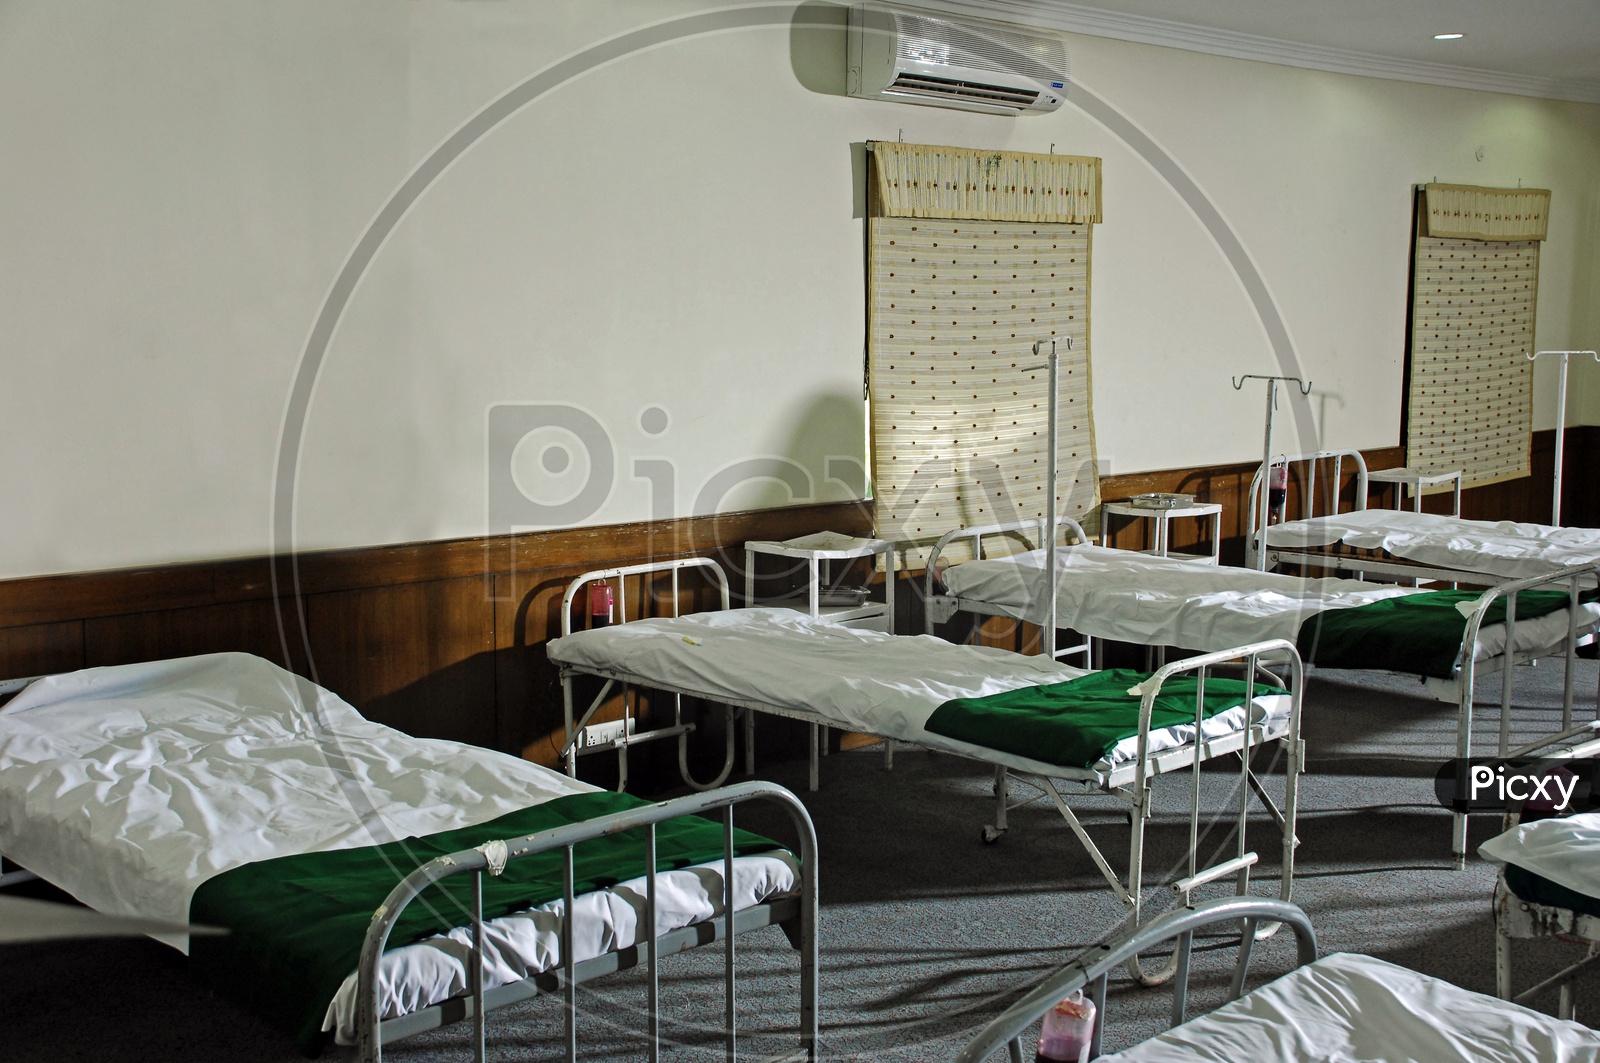 Hospital Beds in a Ward